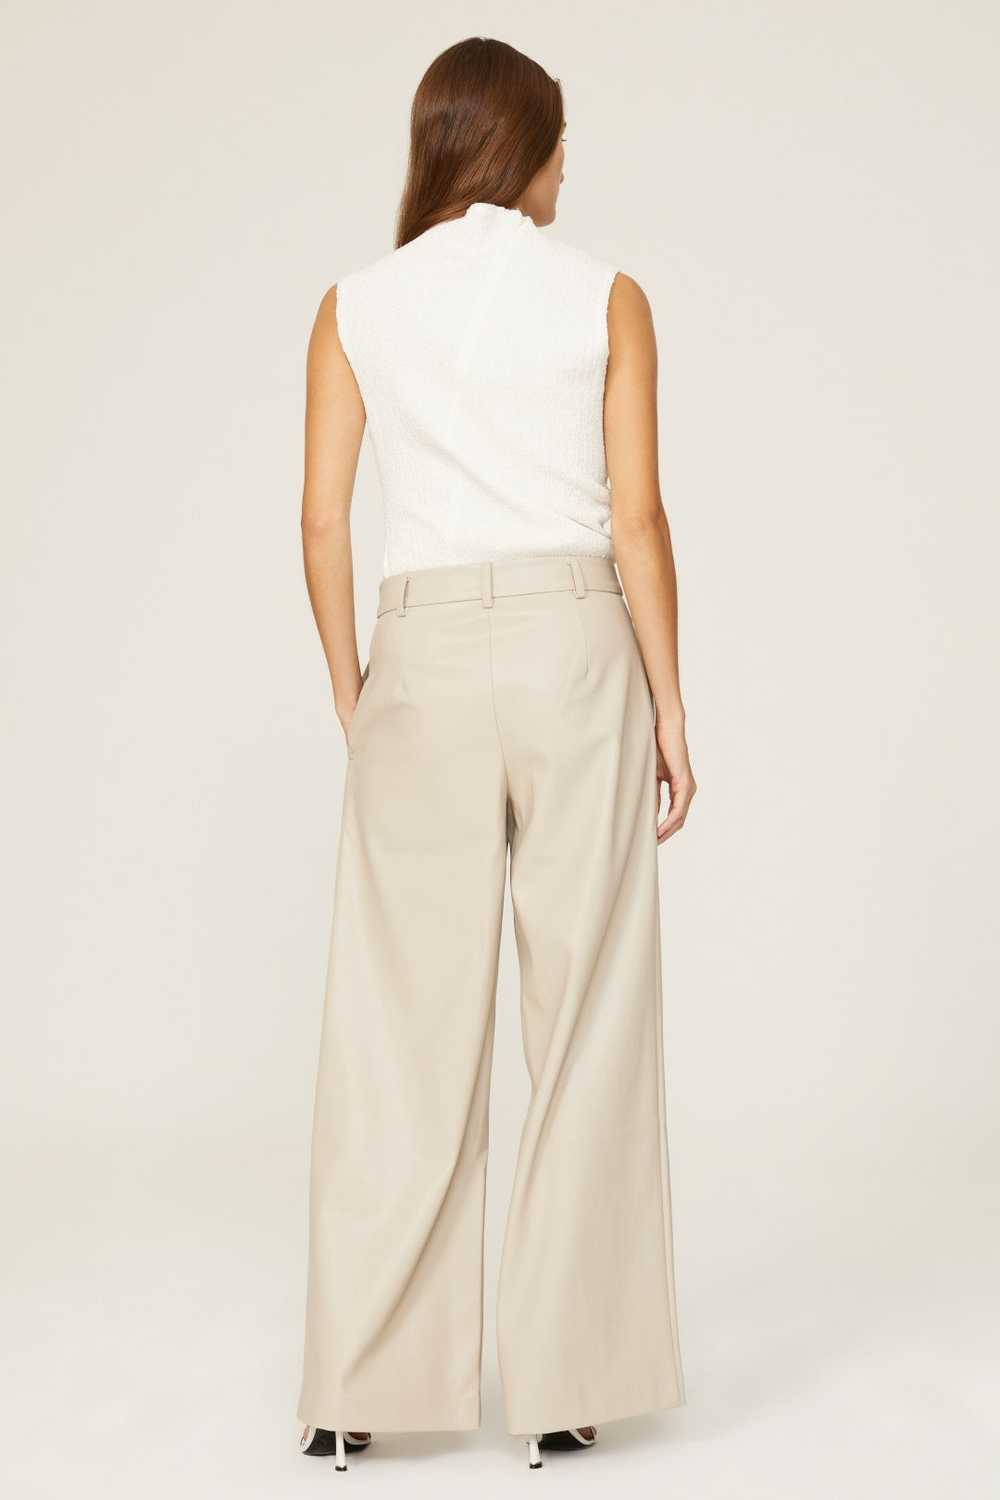 Saunders Collective Wide Leg Faux Leather Pants - image 3